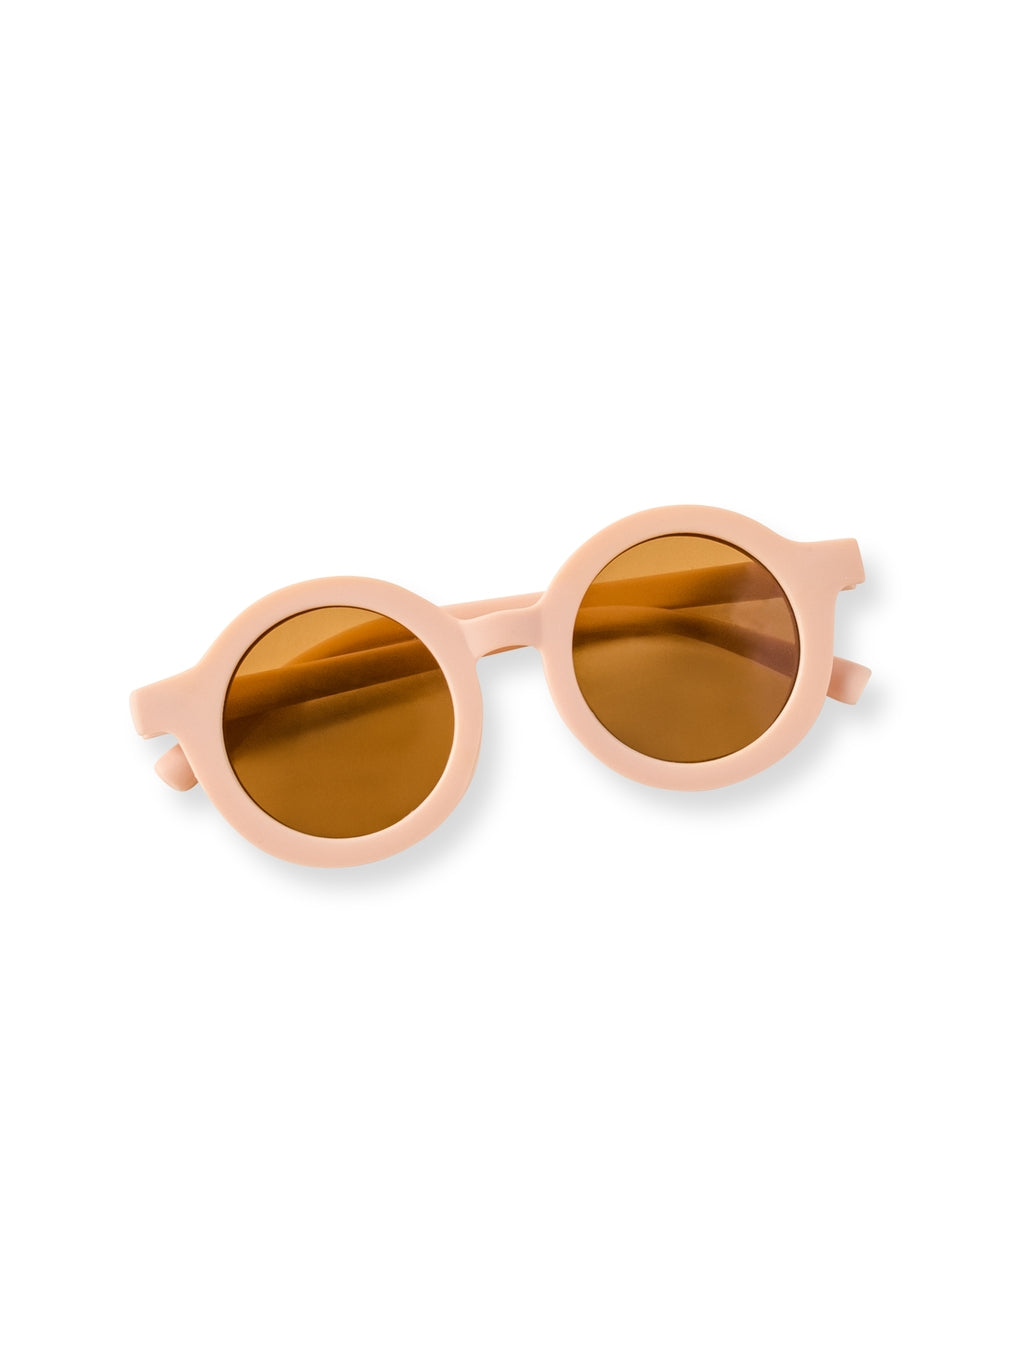 Sunglasses for babies and kids to protect their eyes from harmful UV rays at the beach or park. These adorable sunnies work best for little ones under 10 years old. Made with recycled plastic and UV400 lenses. Available in a variety of colors. 